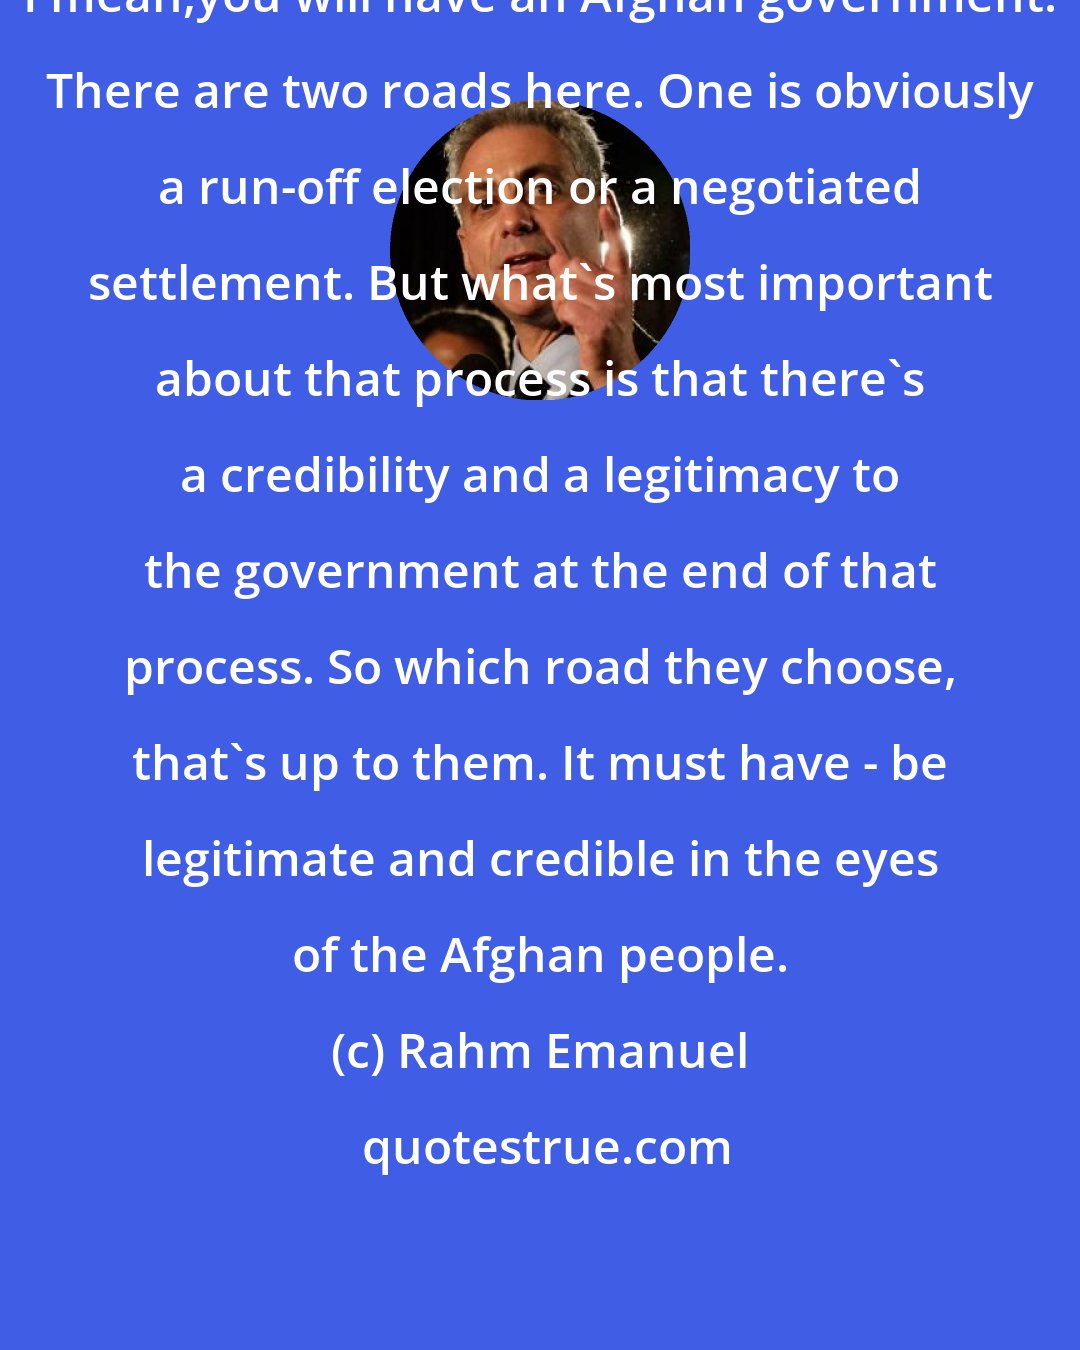 Rahm Emanuel: I mean,you will have an Afghan government. There are two roads here. One is obviously a run-off election or a negotiated settlement. But what's most important about that process is that there's a credibility and a legitimacy to the government at the end of that process. So which road they choose, that's up to them. It must have - be legitimate and credible in the eyes of the Afghan people.